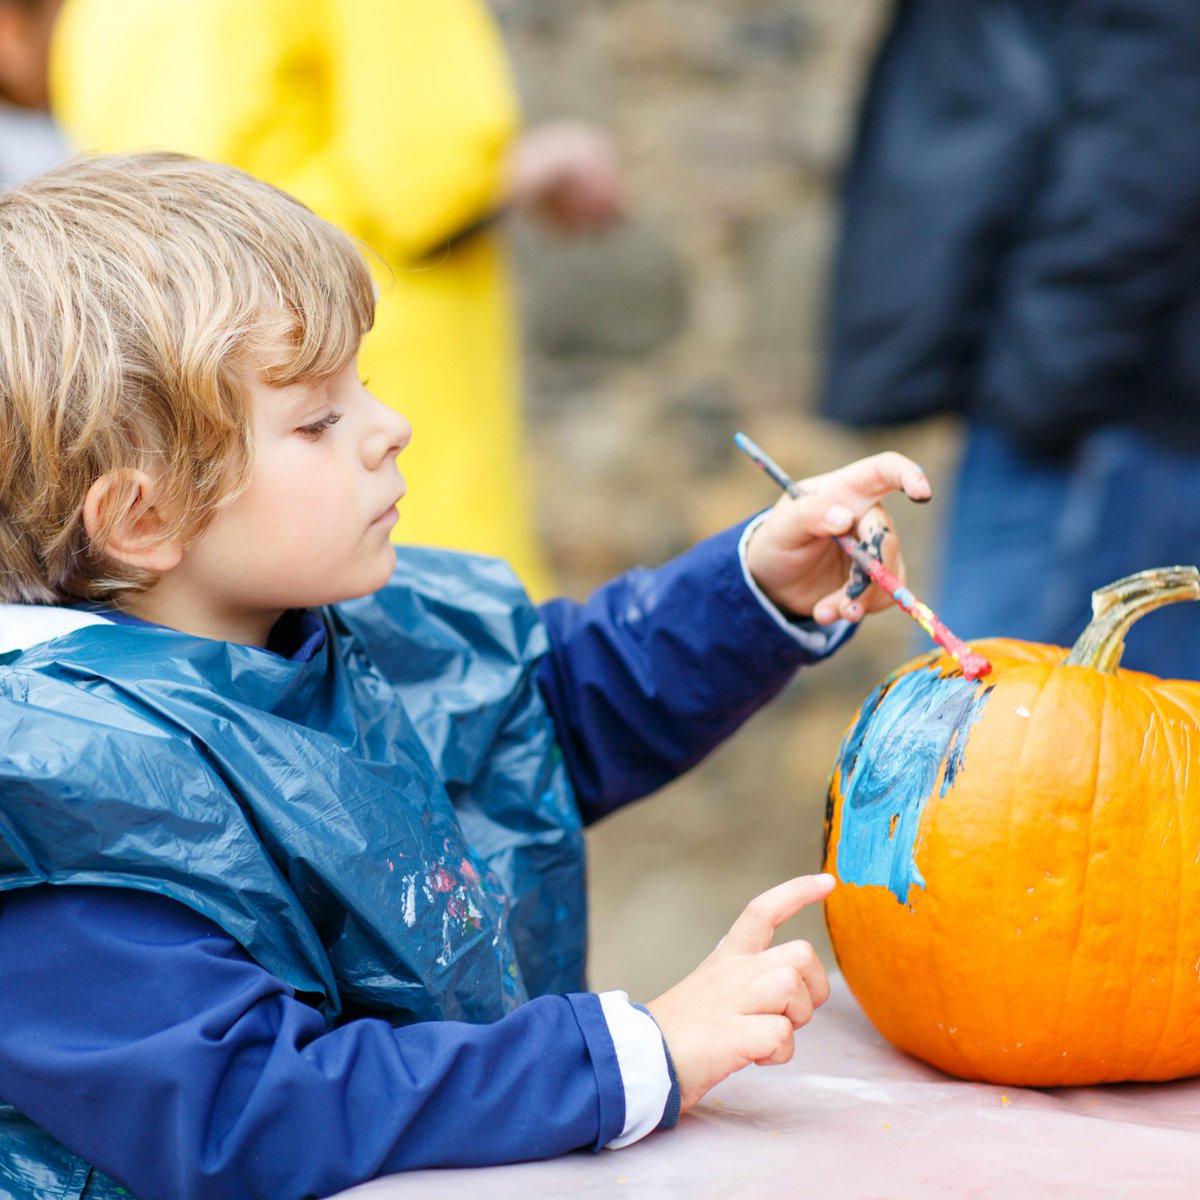 Halloween season is upon us 🎃 Looking for some spooktacular activities to entertain the kids this half-term? 👻 Come and scare yourselves silly at one of the many entertaining family-friendly Halloween events taking place across Wales 👇 cadw.gov.wales/visit/whats-on…